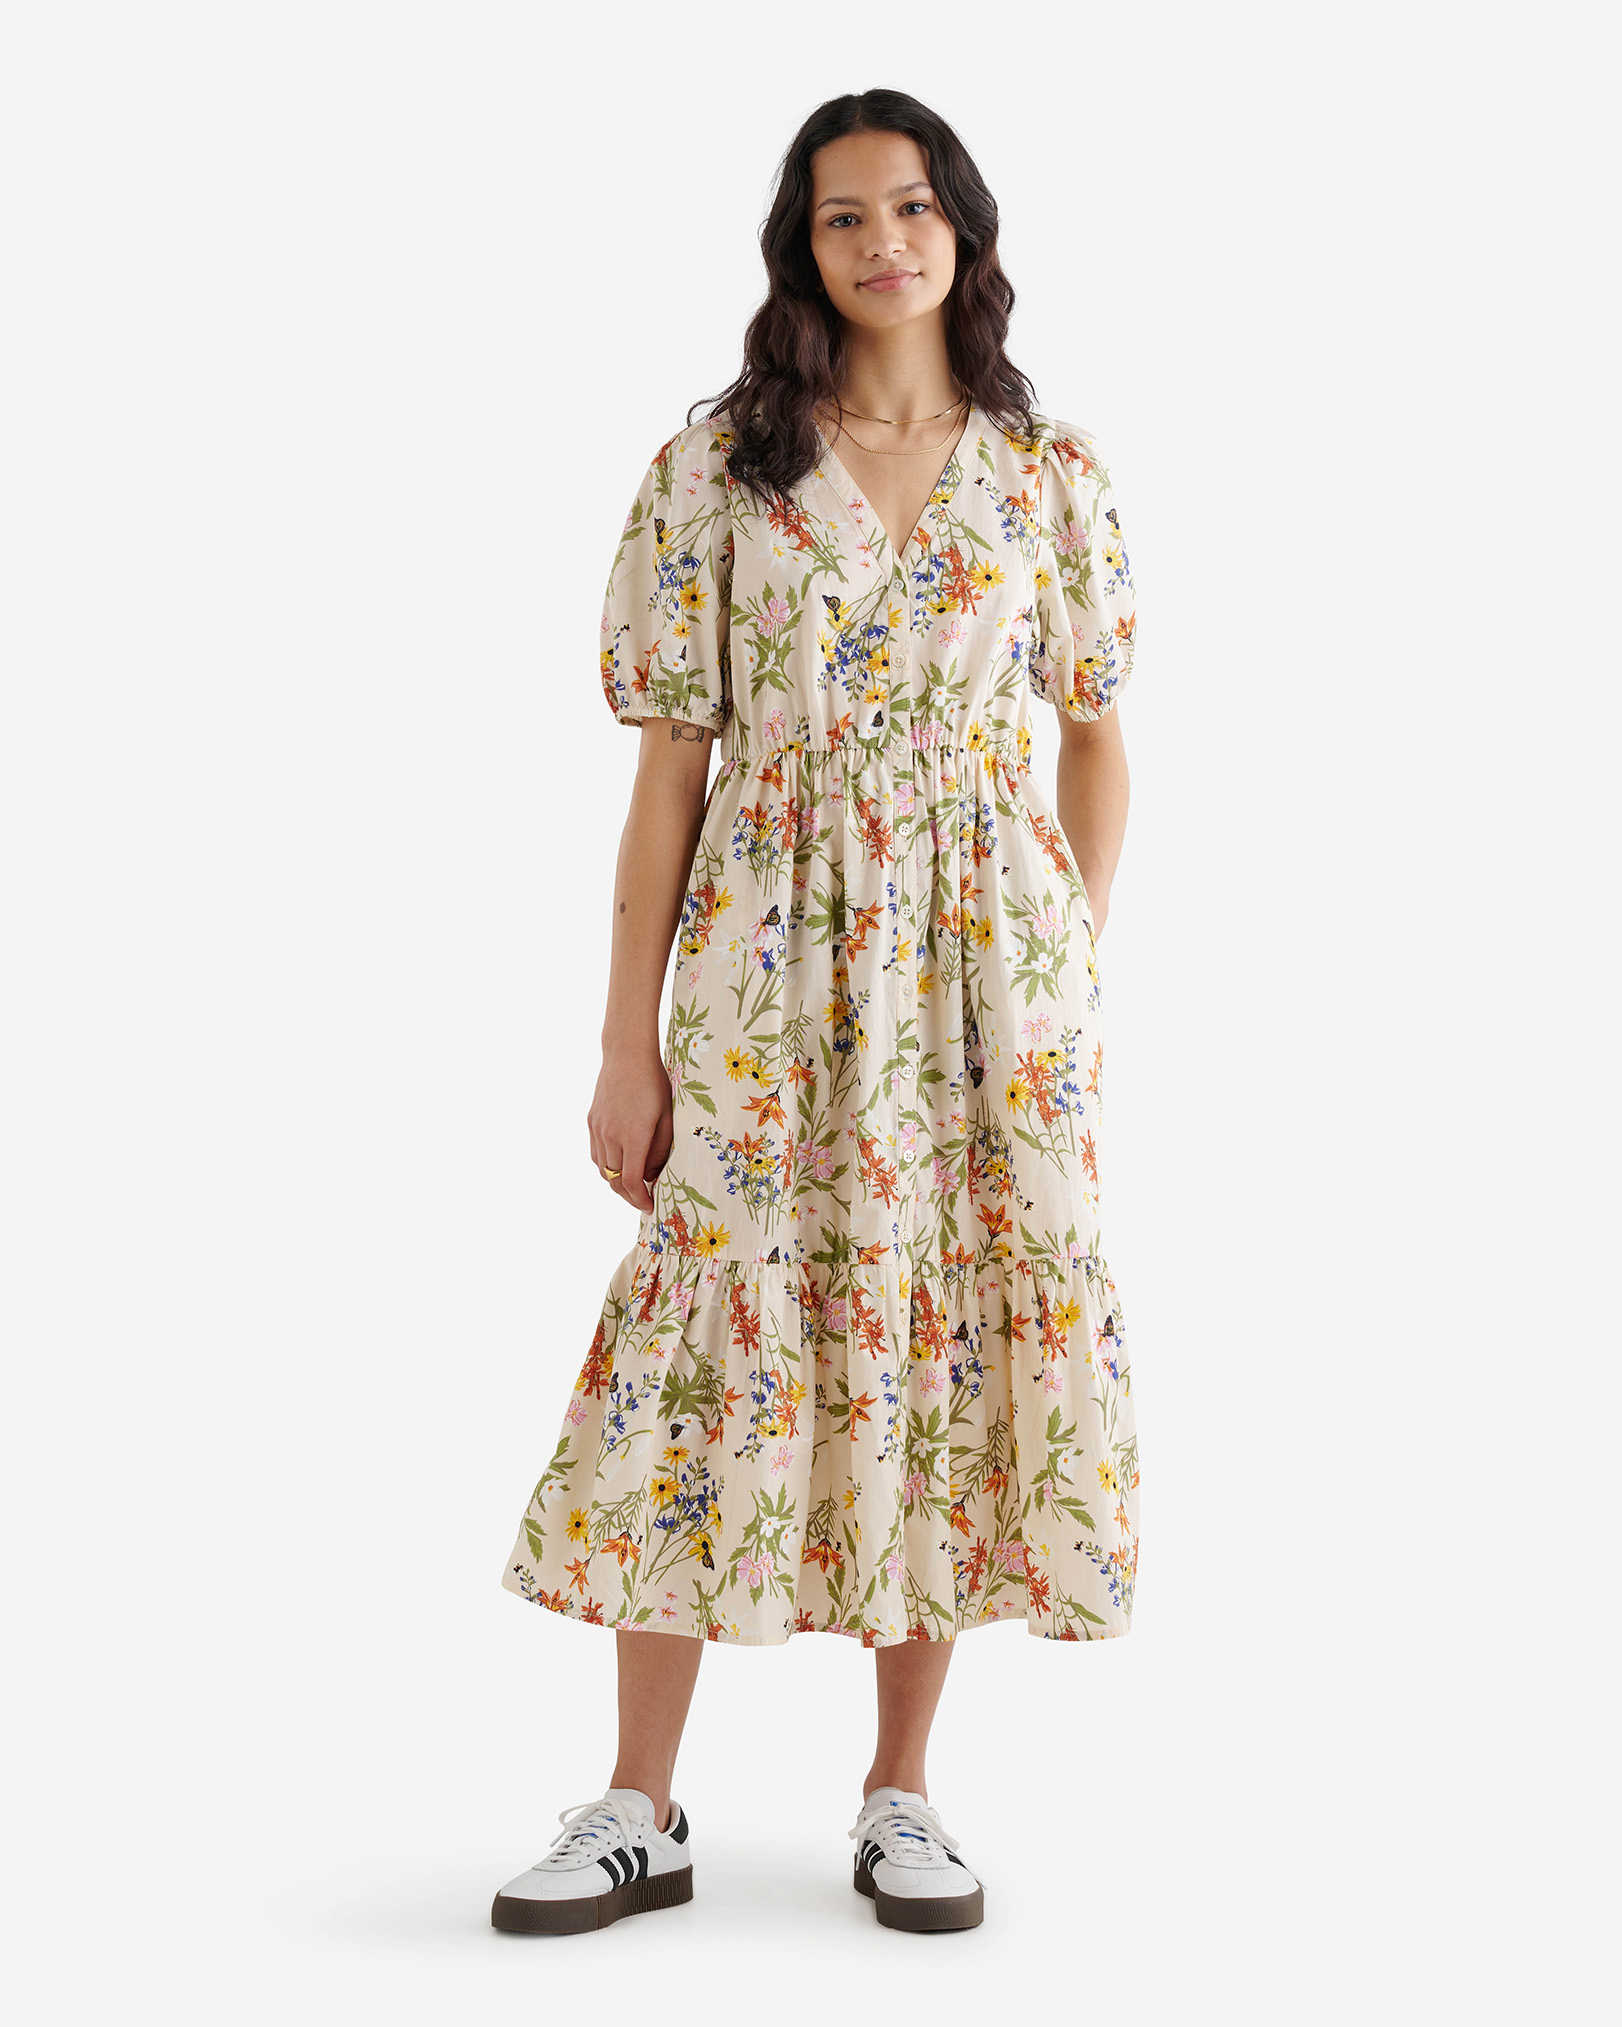 Roots Floral Poplin Dress in Assorted